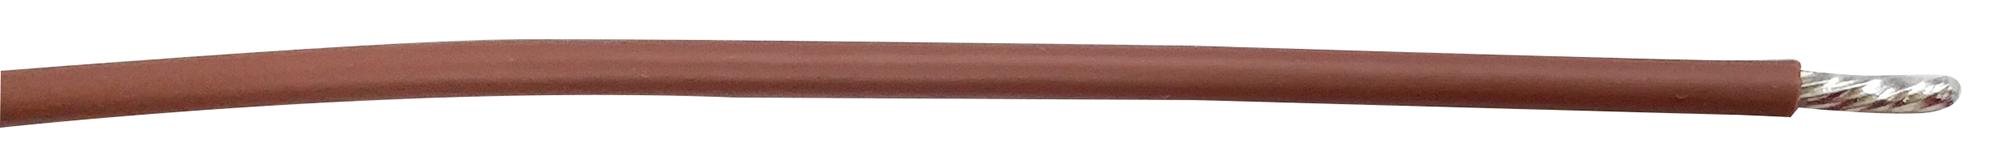 PP002529 CABLE WIRE, 20AWG, BROWN, 305M PRO POWER